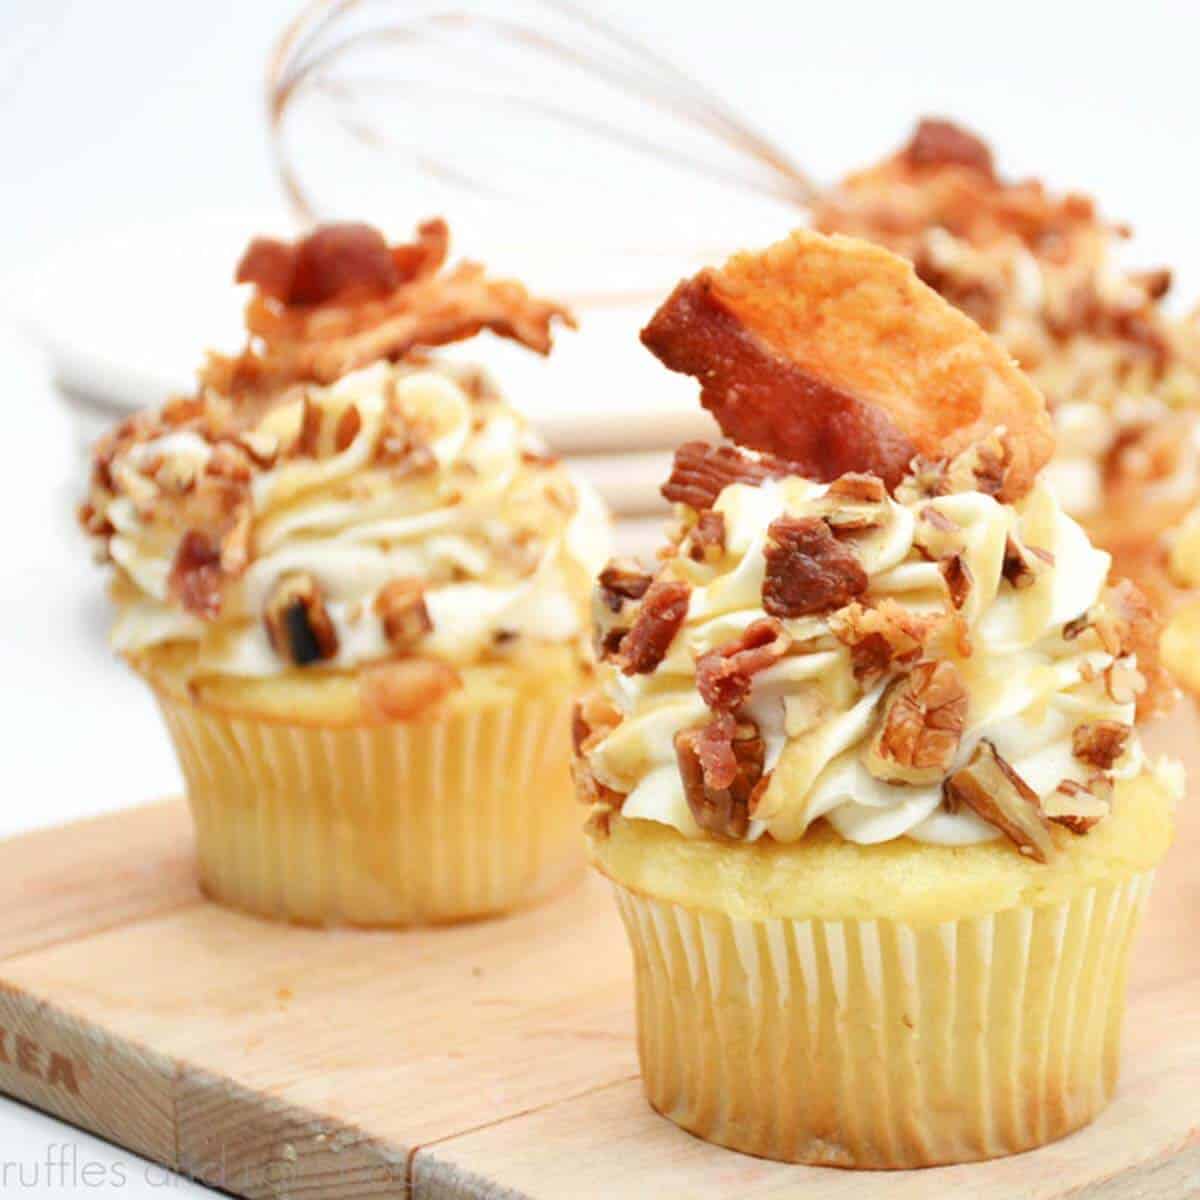 Close up square image of three maple bacon cupcakes on a small wood cutting board in front of a whisk.